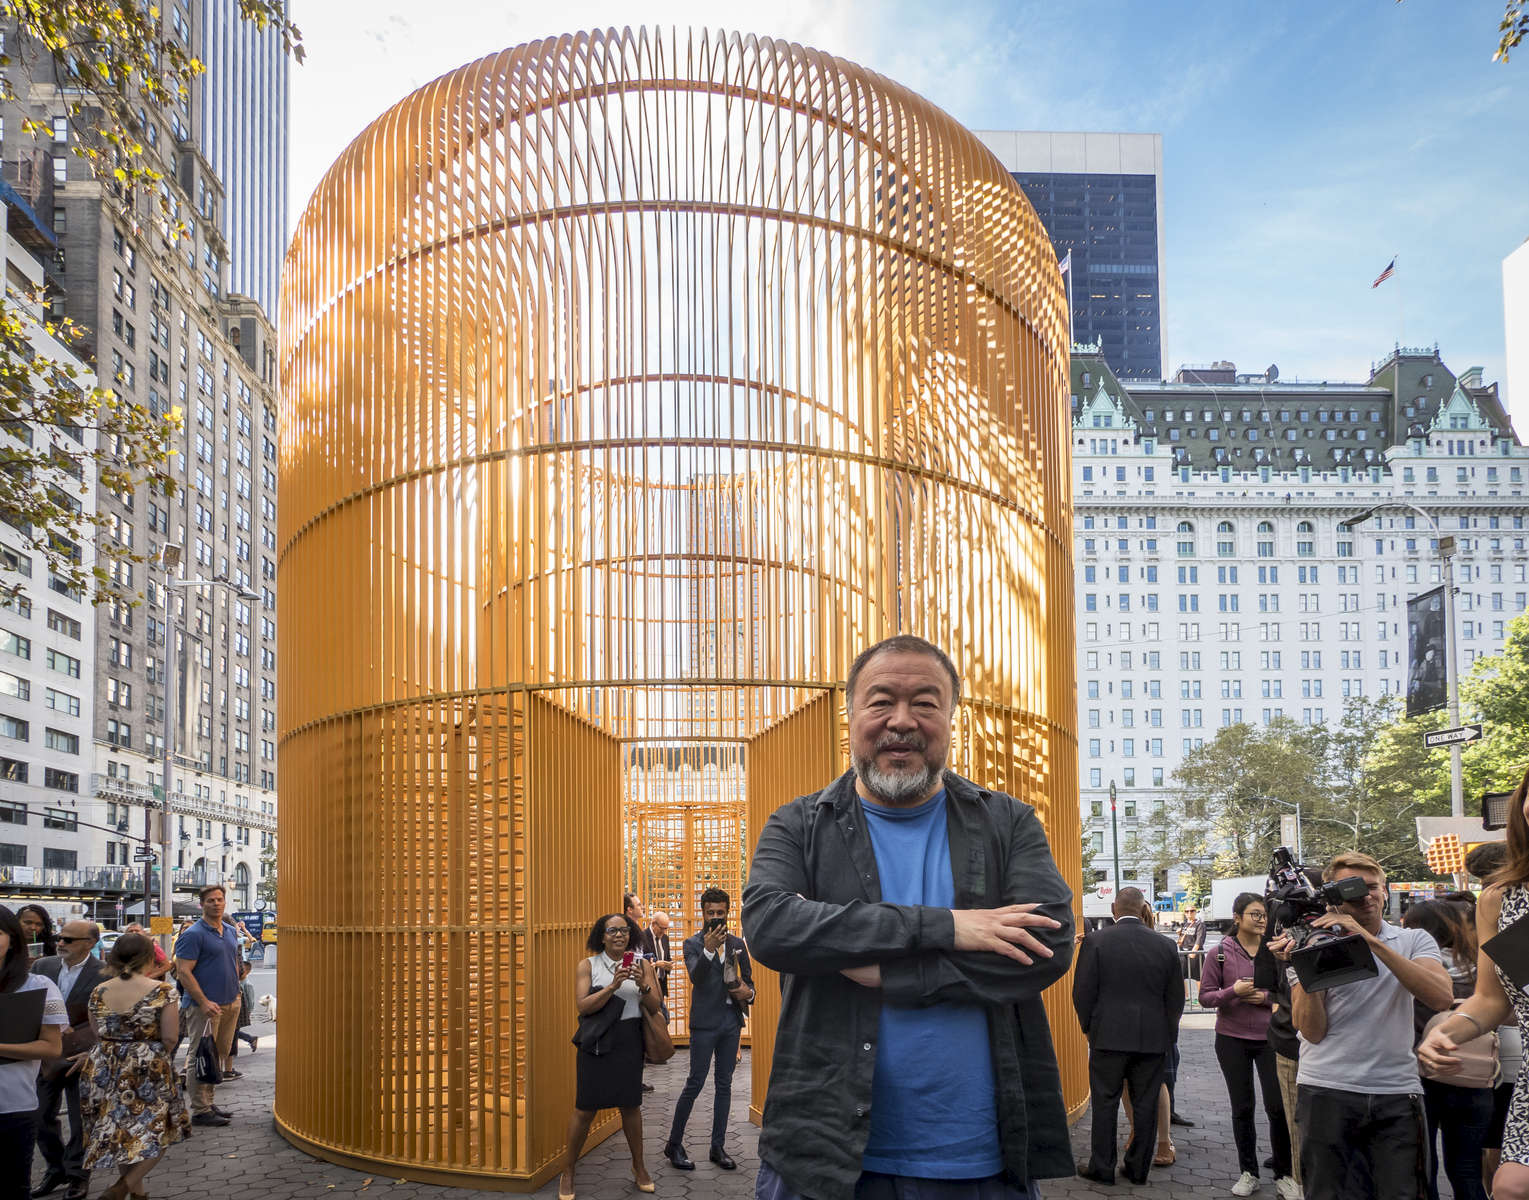 Chinese contemporary artist and activist Ai Weiwei poses for photos after the news conference concerning his instillation titled Good Fences Make Good Neighbors, at the corner of 5th Avenue and 60th Street in Manhattan on Tuesday, October 10, 2017. The multi-venue exhibition instillation titled Good Fences Make Good Neighbors is inspired by the international migration crisis and current global geopolitical landscape. 